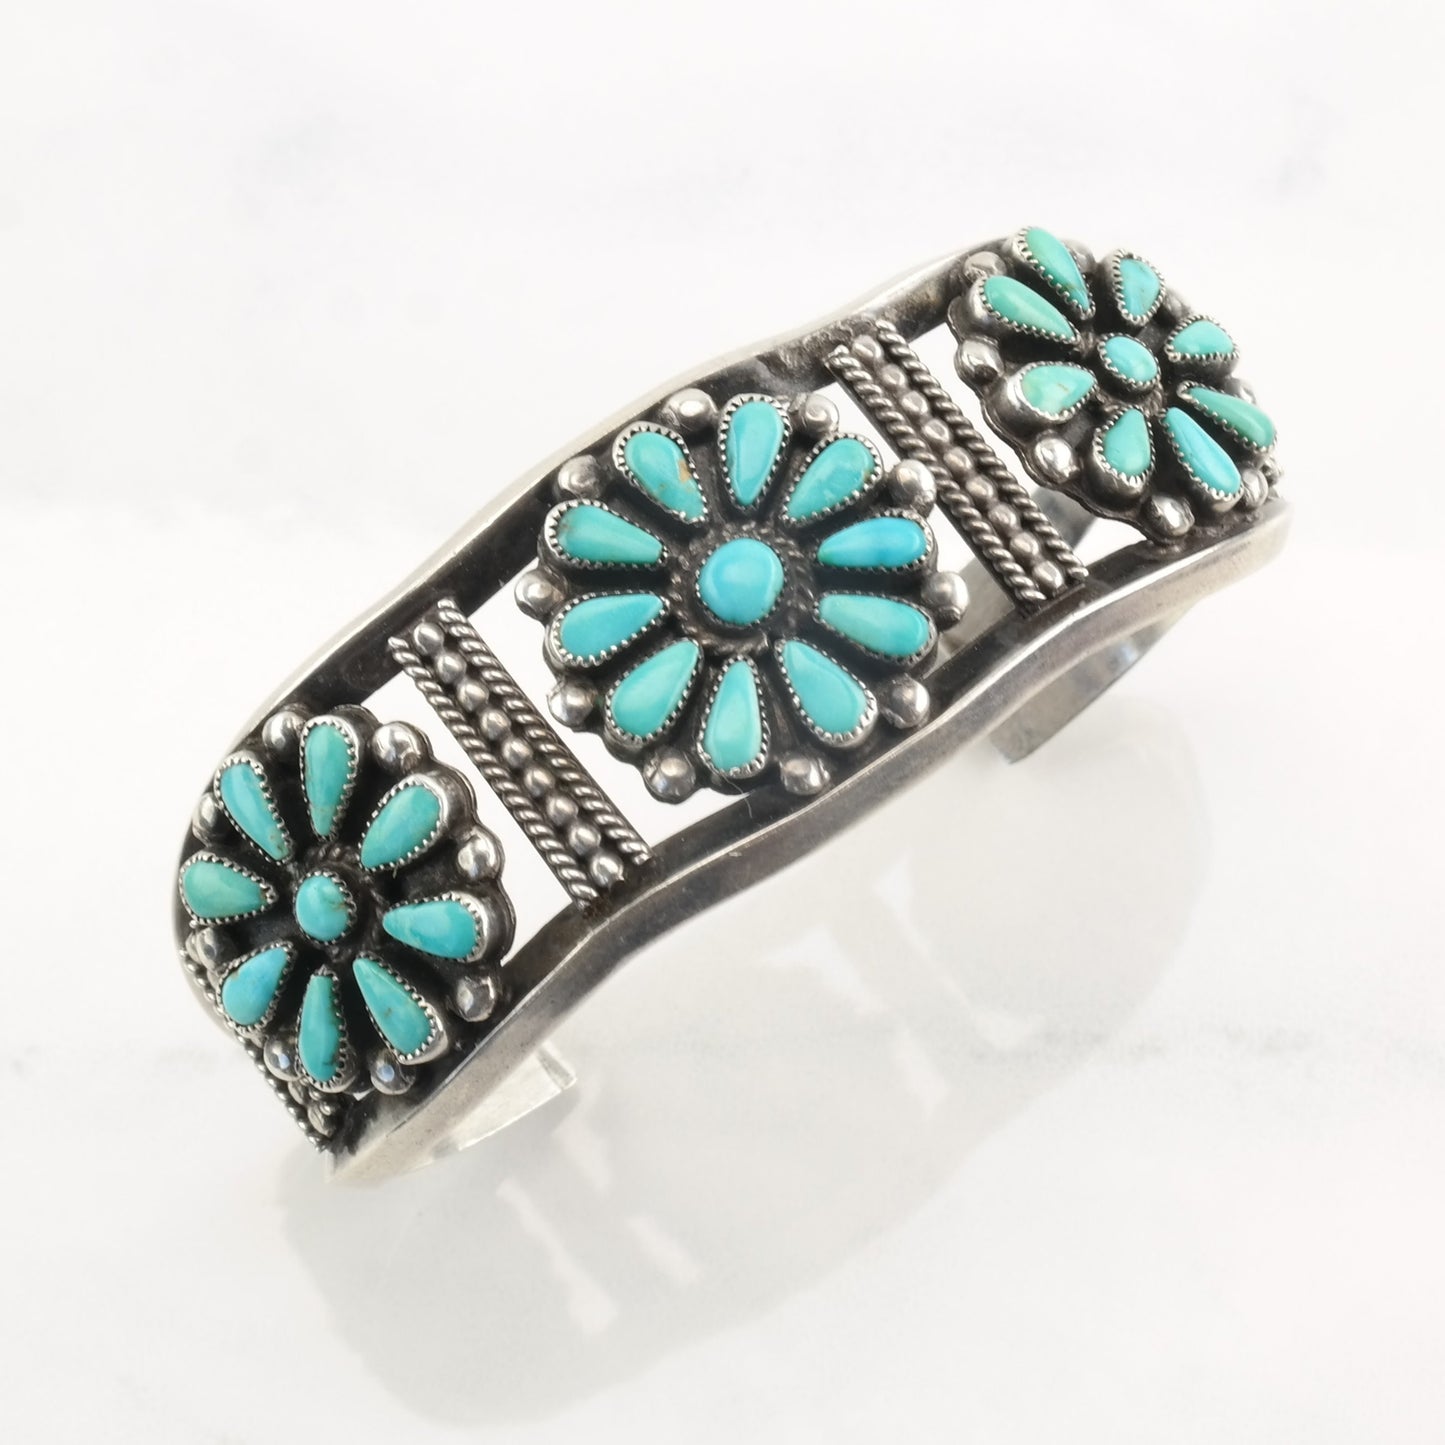 1950's Native American Sterling Silver Cuff Bracelet Petit Point Turquoise Ingot Silver